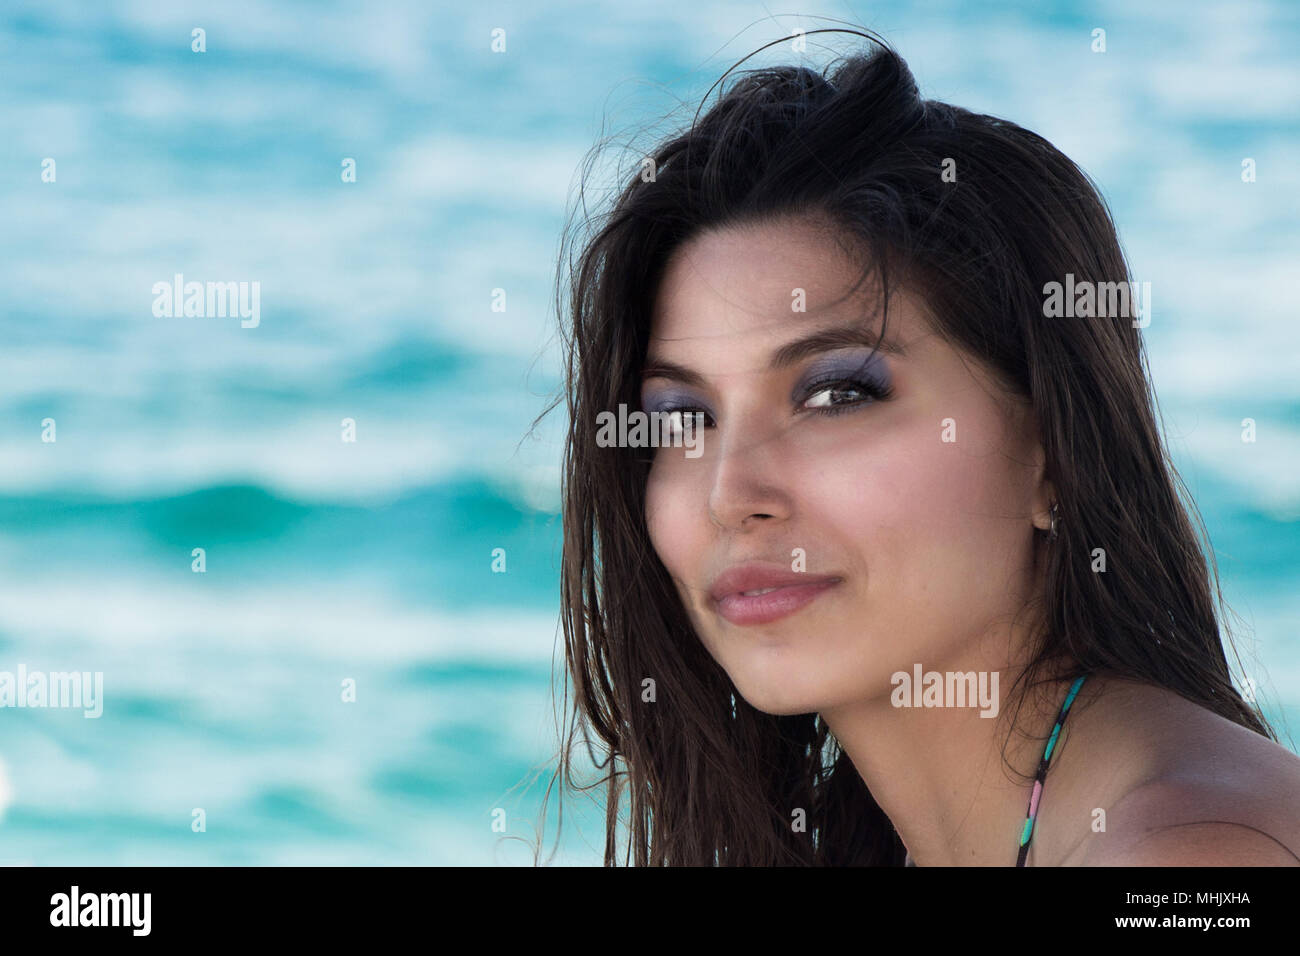 https://c8.alamy.com/comp/MHJXHA/beautiful-black-hair-lady-latina-mexican-woman-on-the-sea-background-looking-at-you-lovely-MHJXHA.jpg